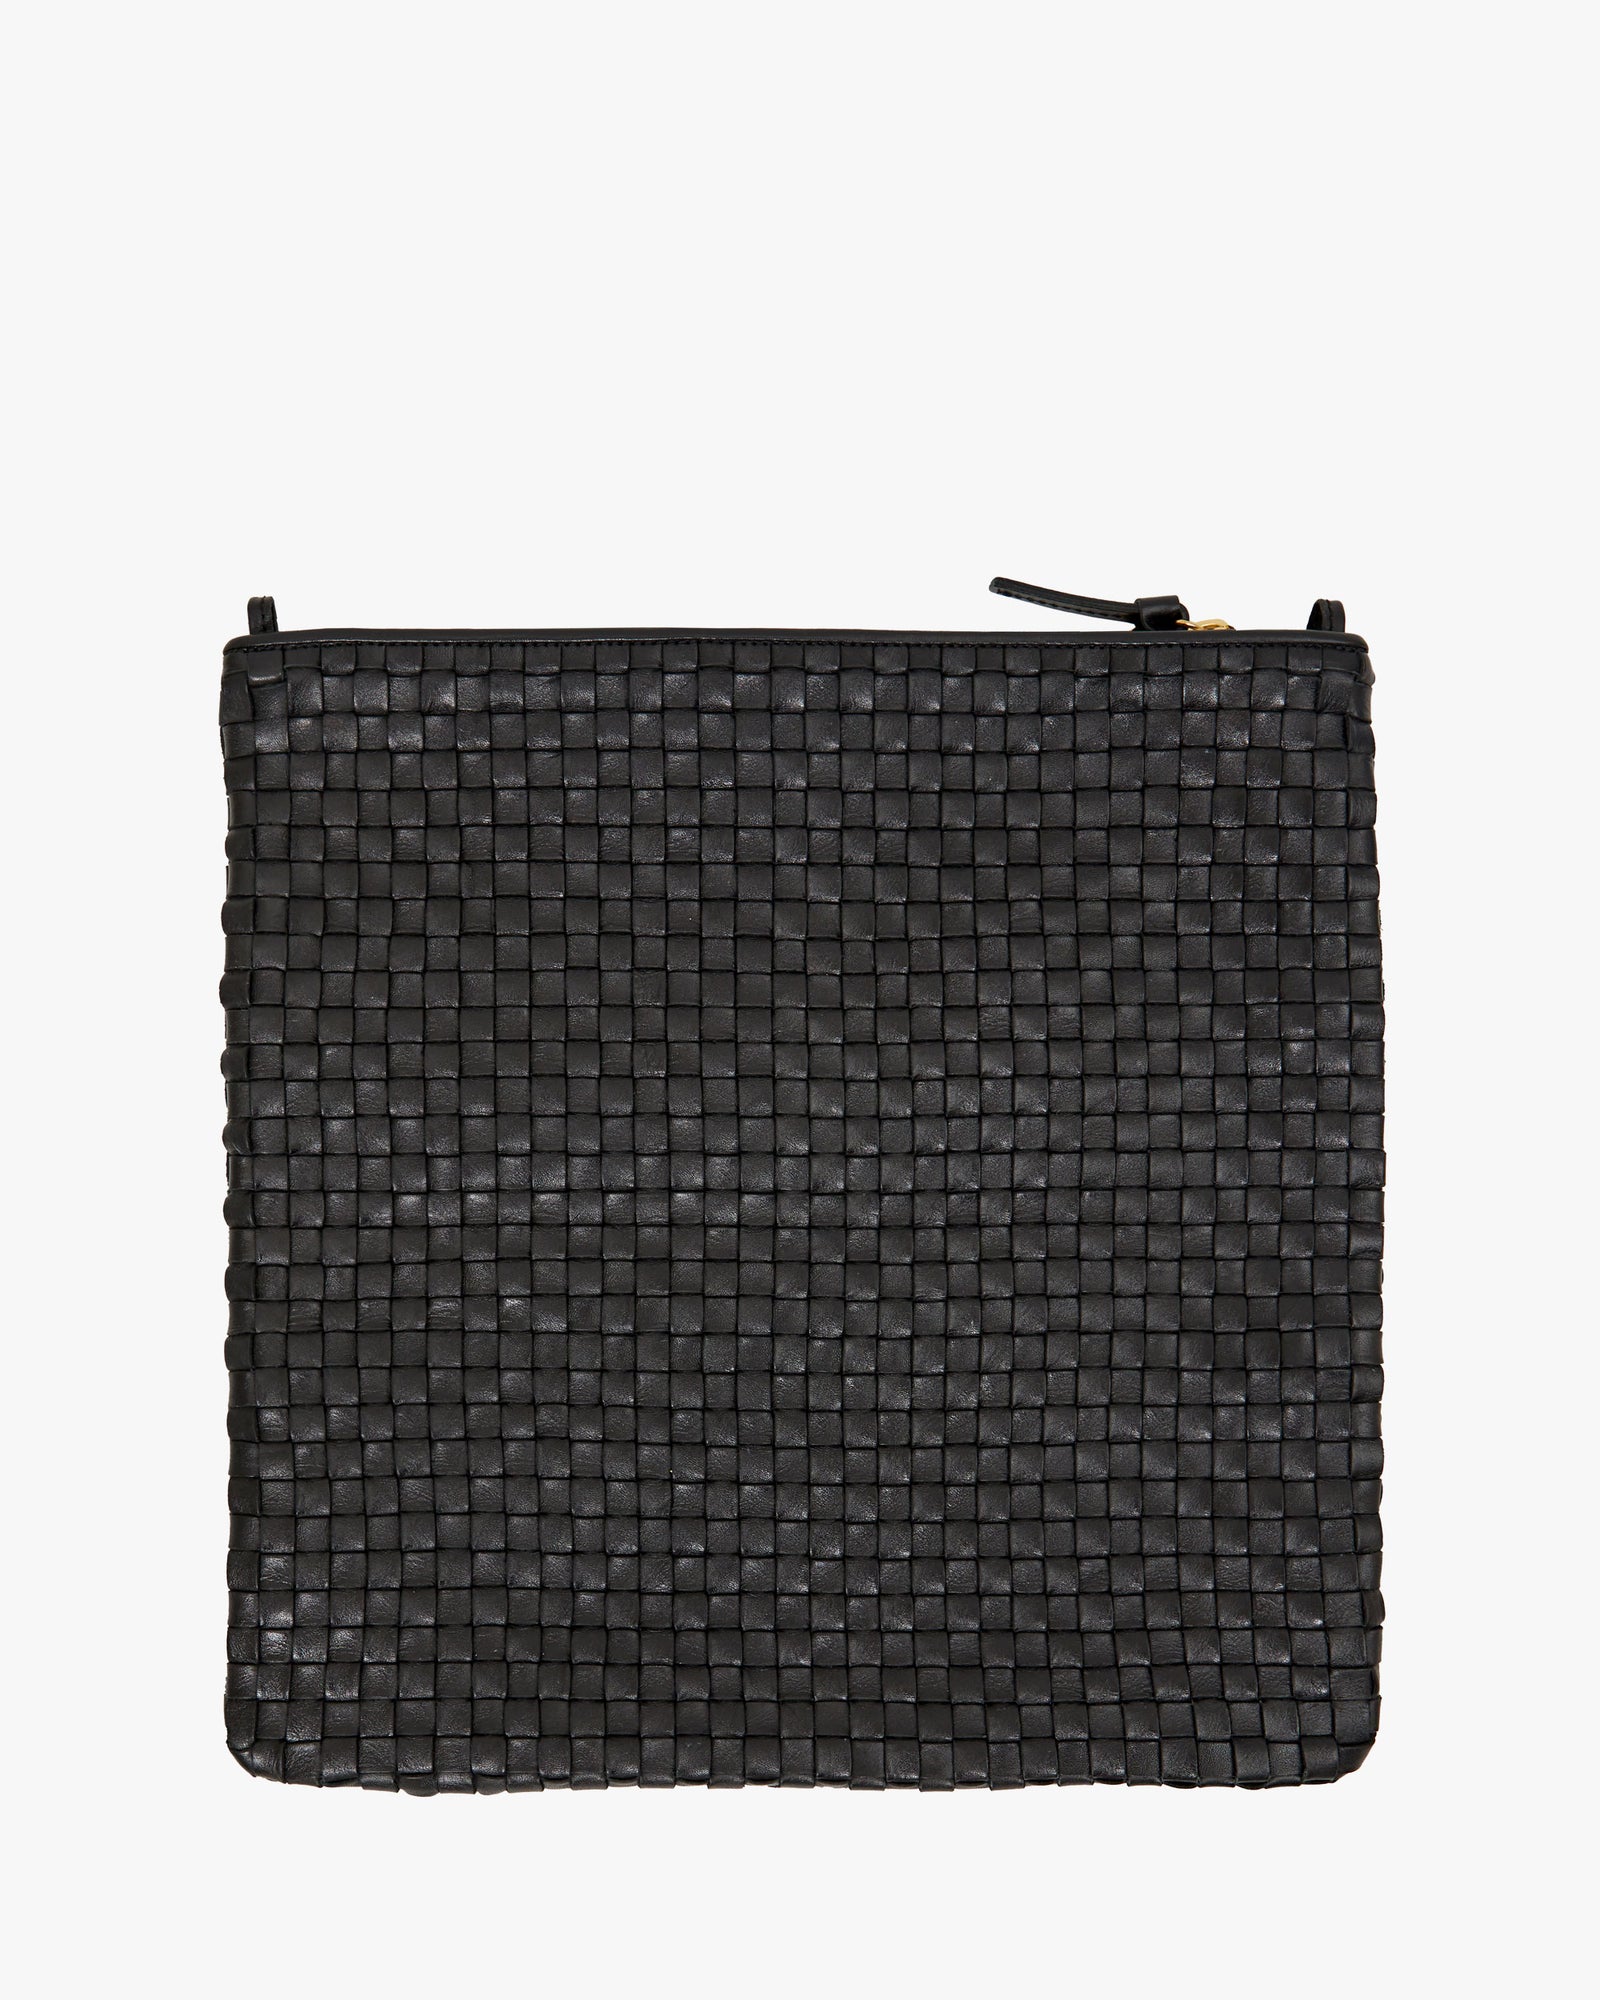 unfolded flat image of the Black Woven Checker Foldover Clutch w/ Tabs